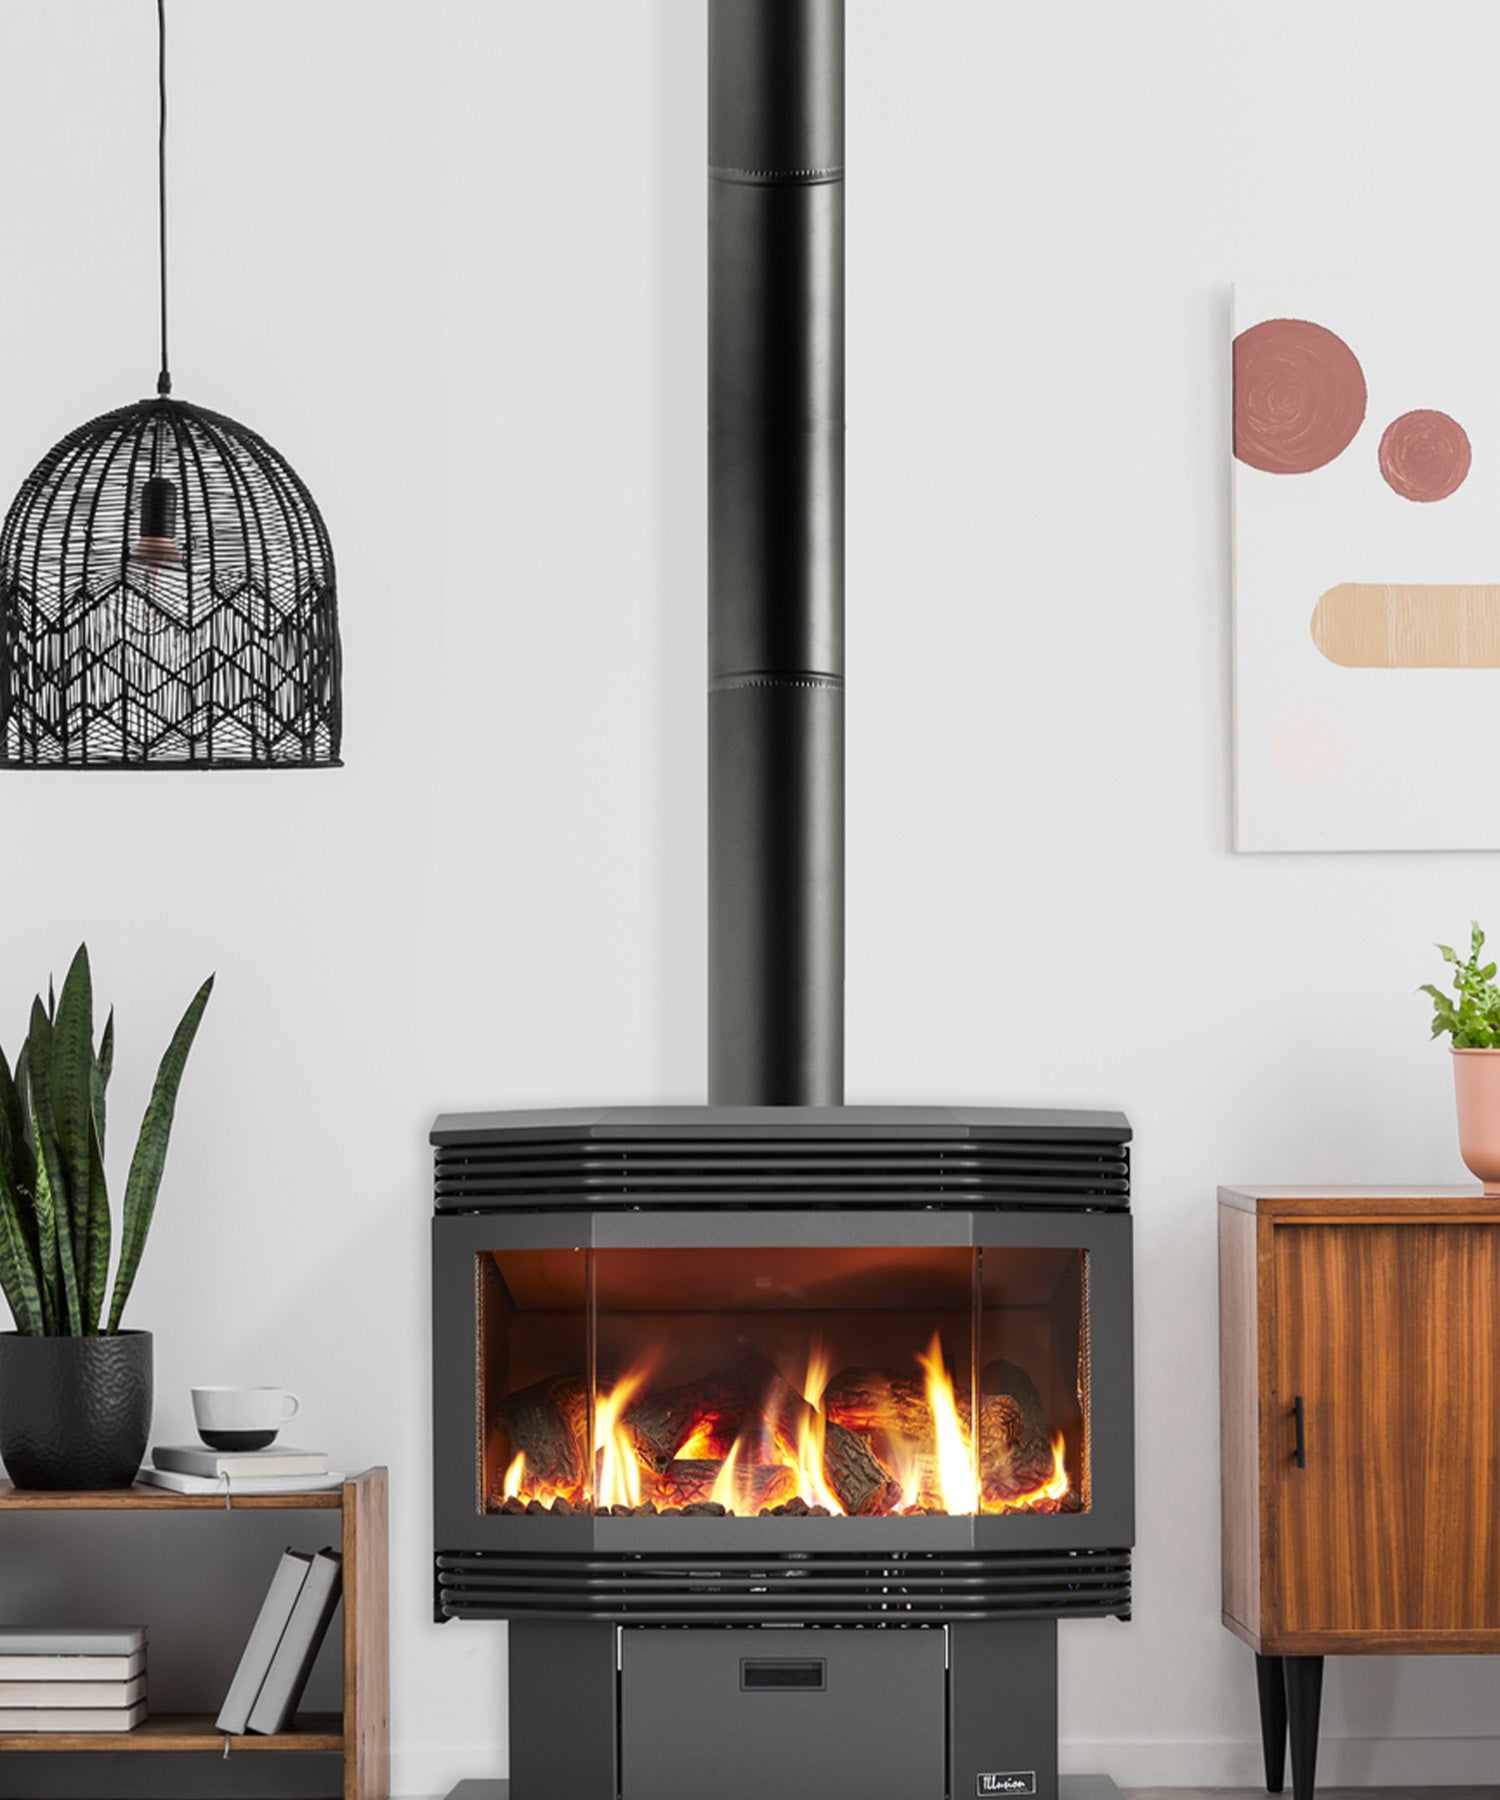 How to style your living room around your freestanding gas log fireplace